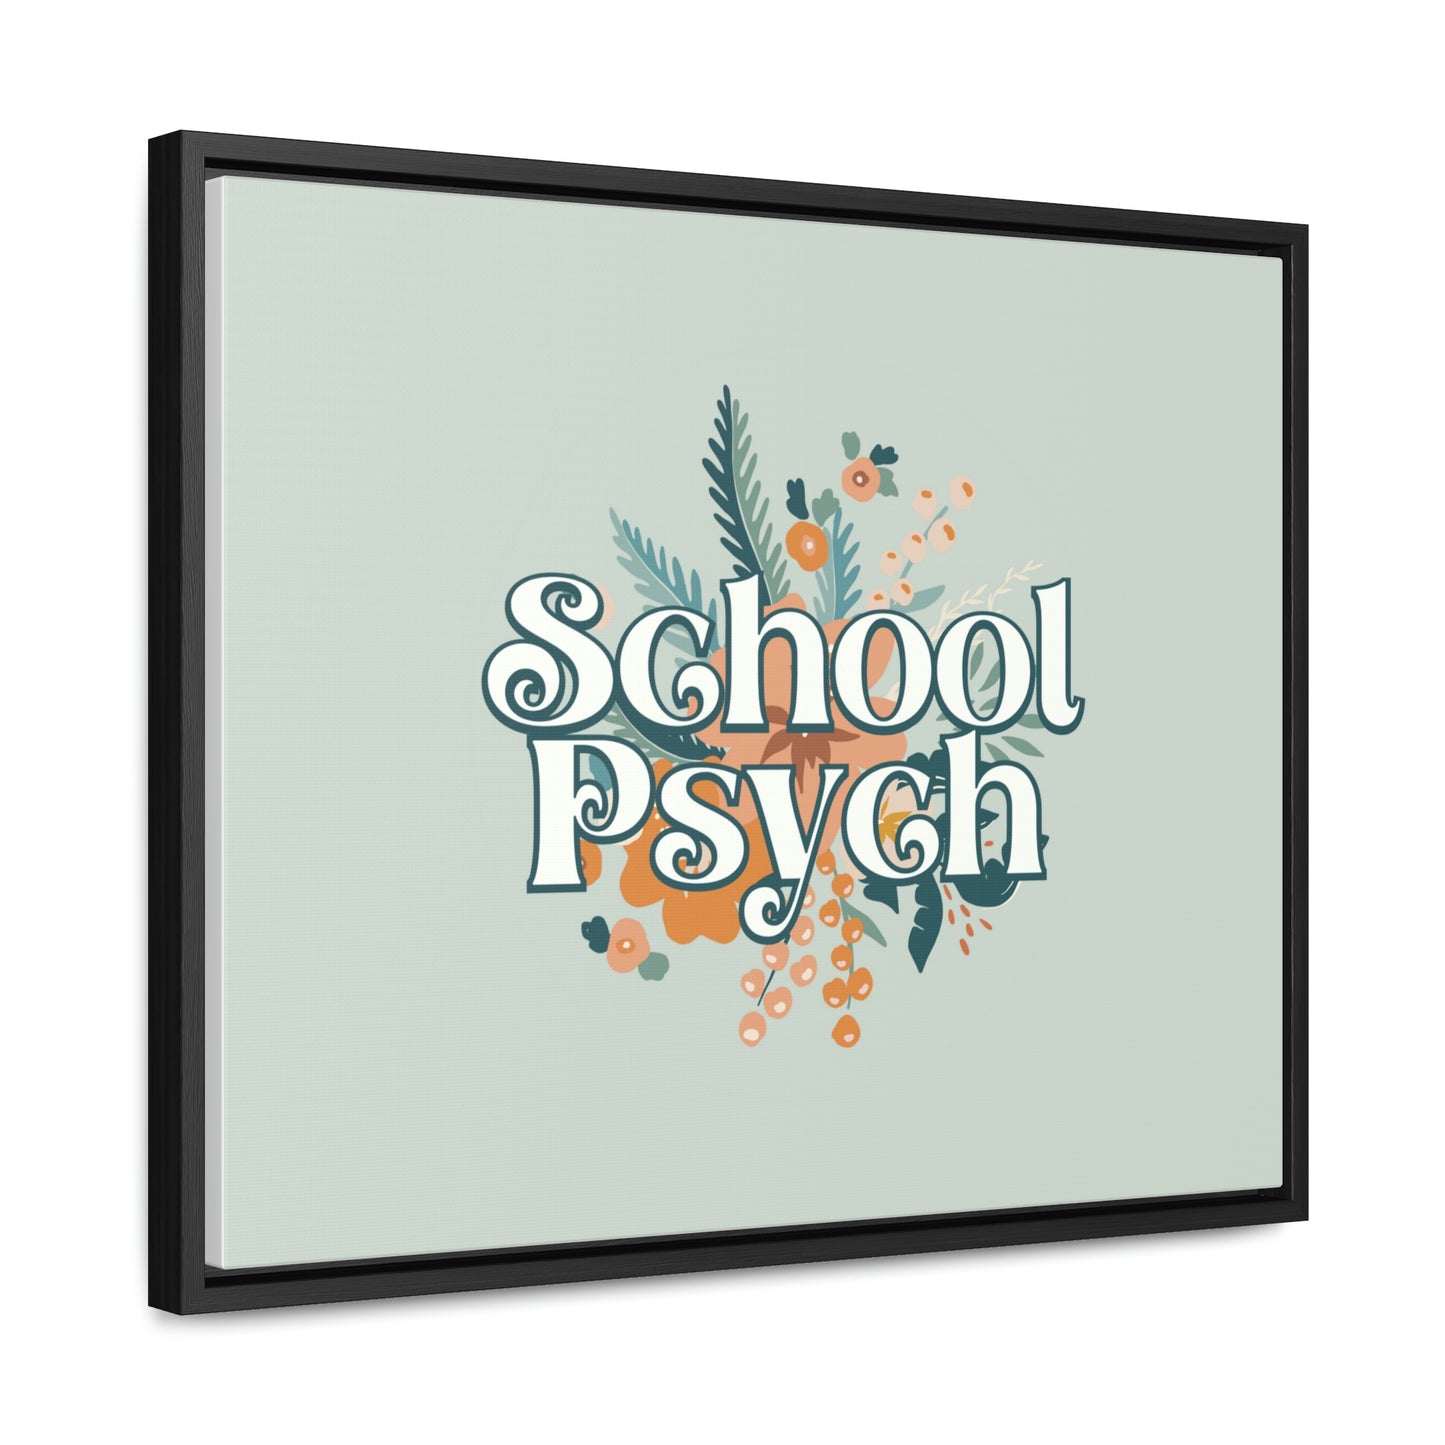 Floral School Psych Framed Canvas (20 x 16 in)